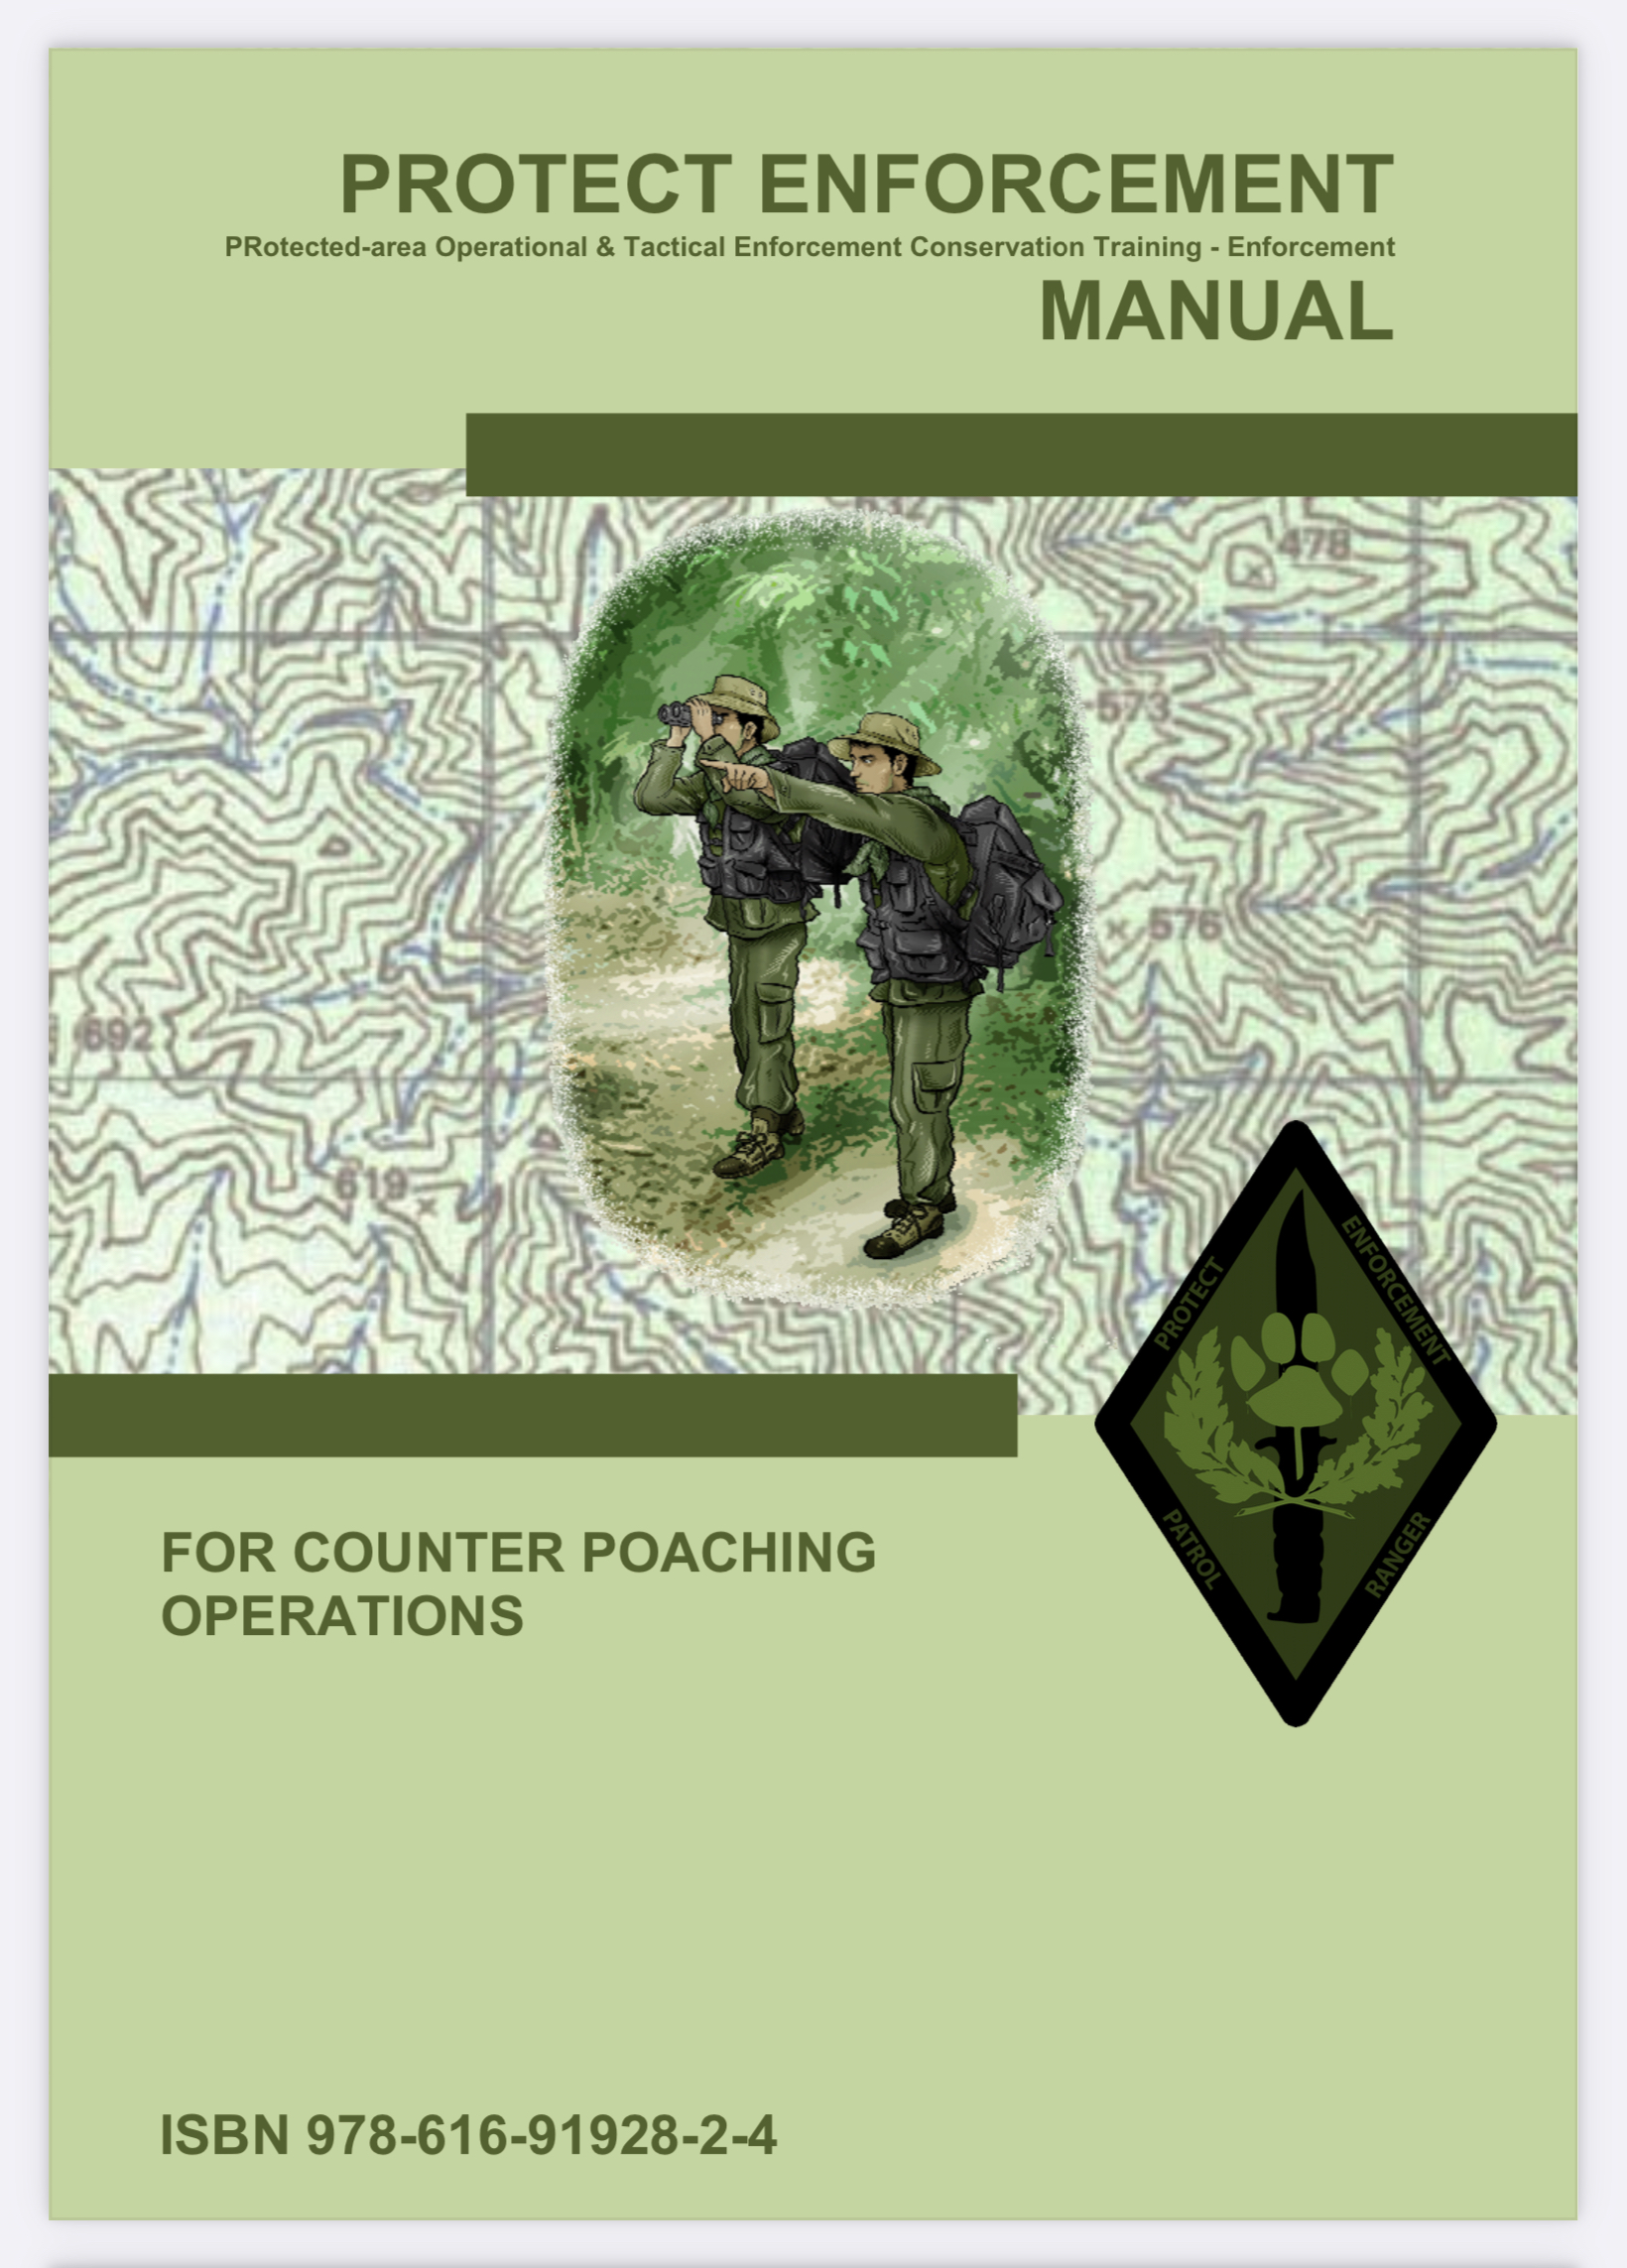 Protect Enforcement Manual cover